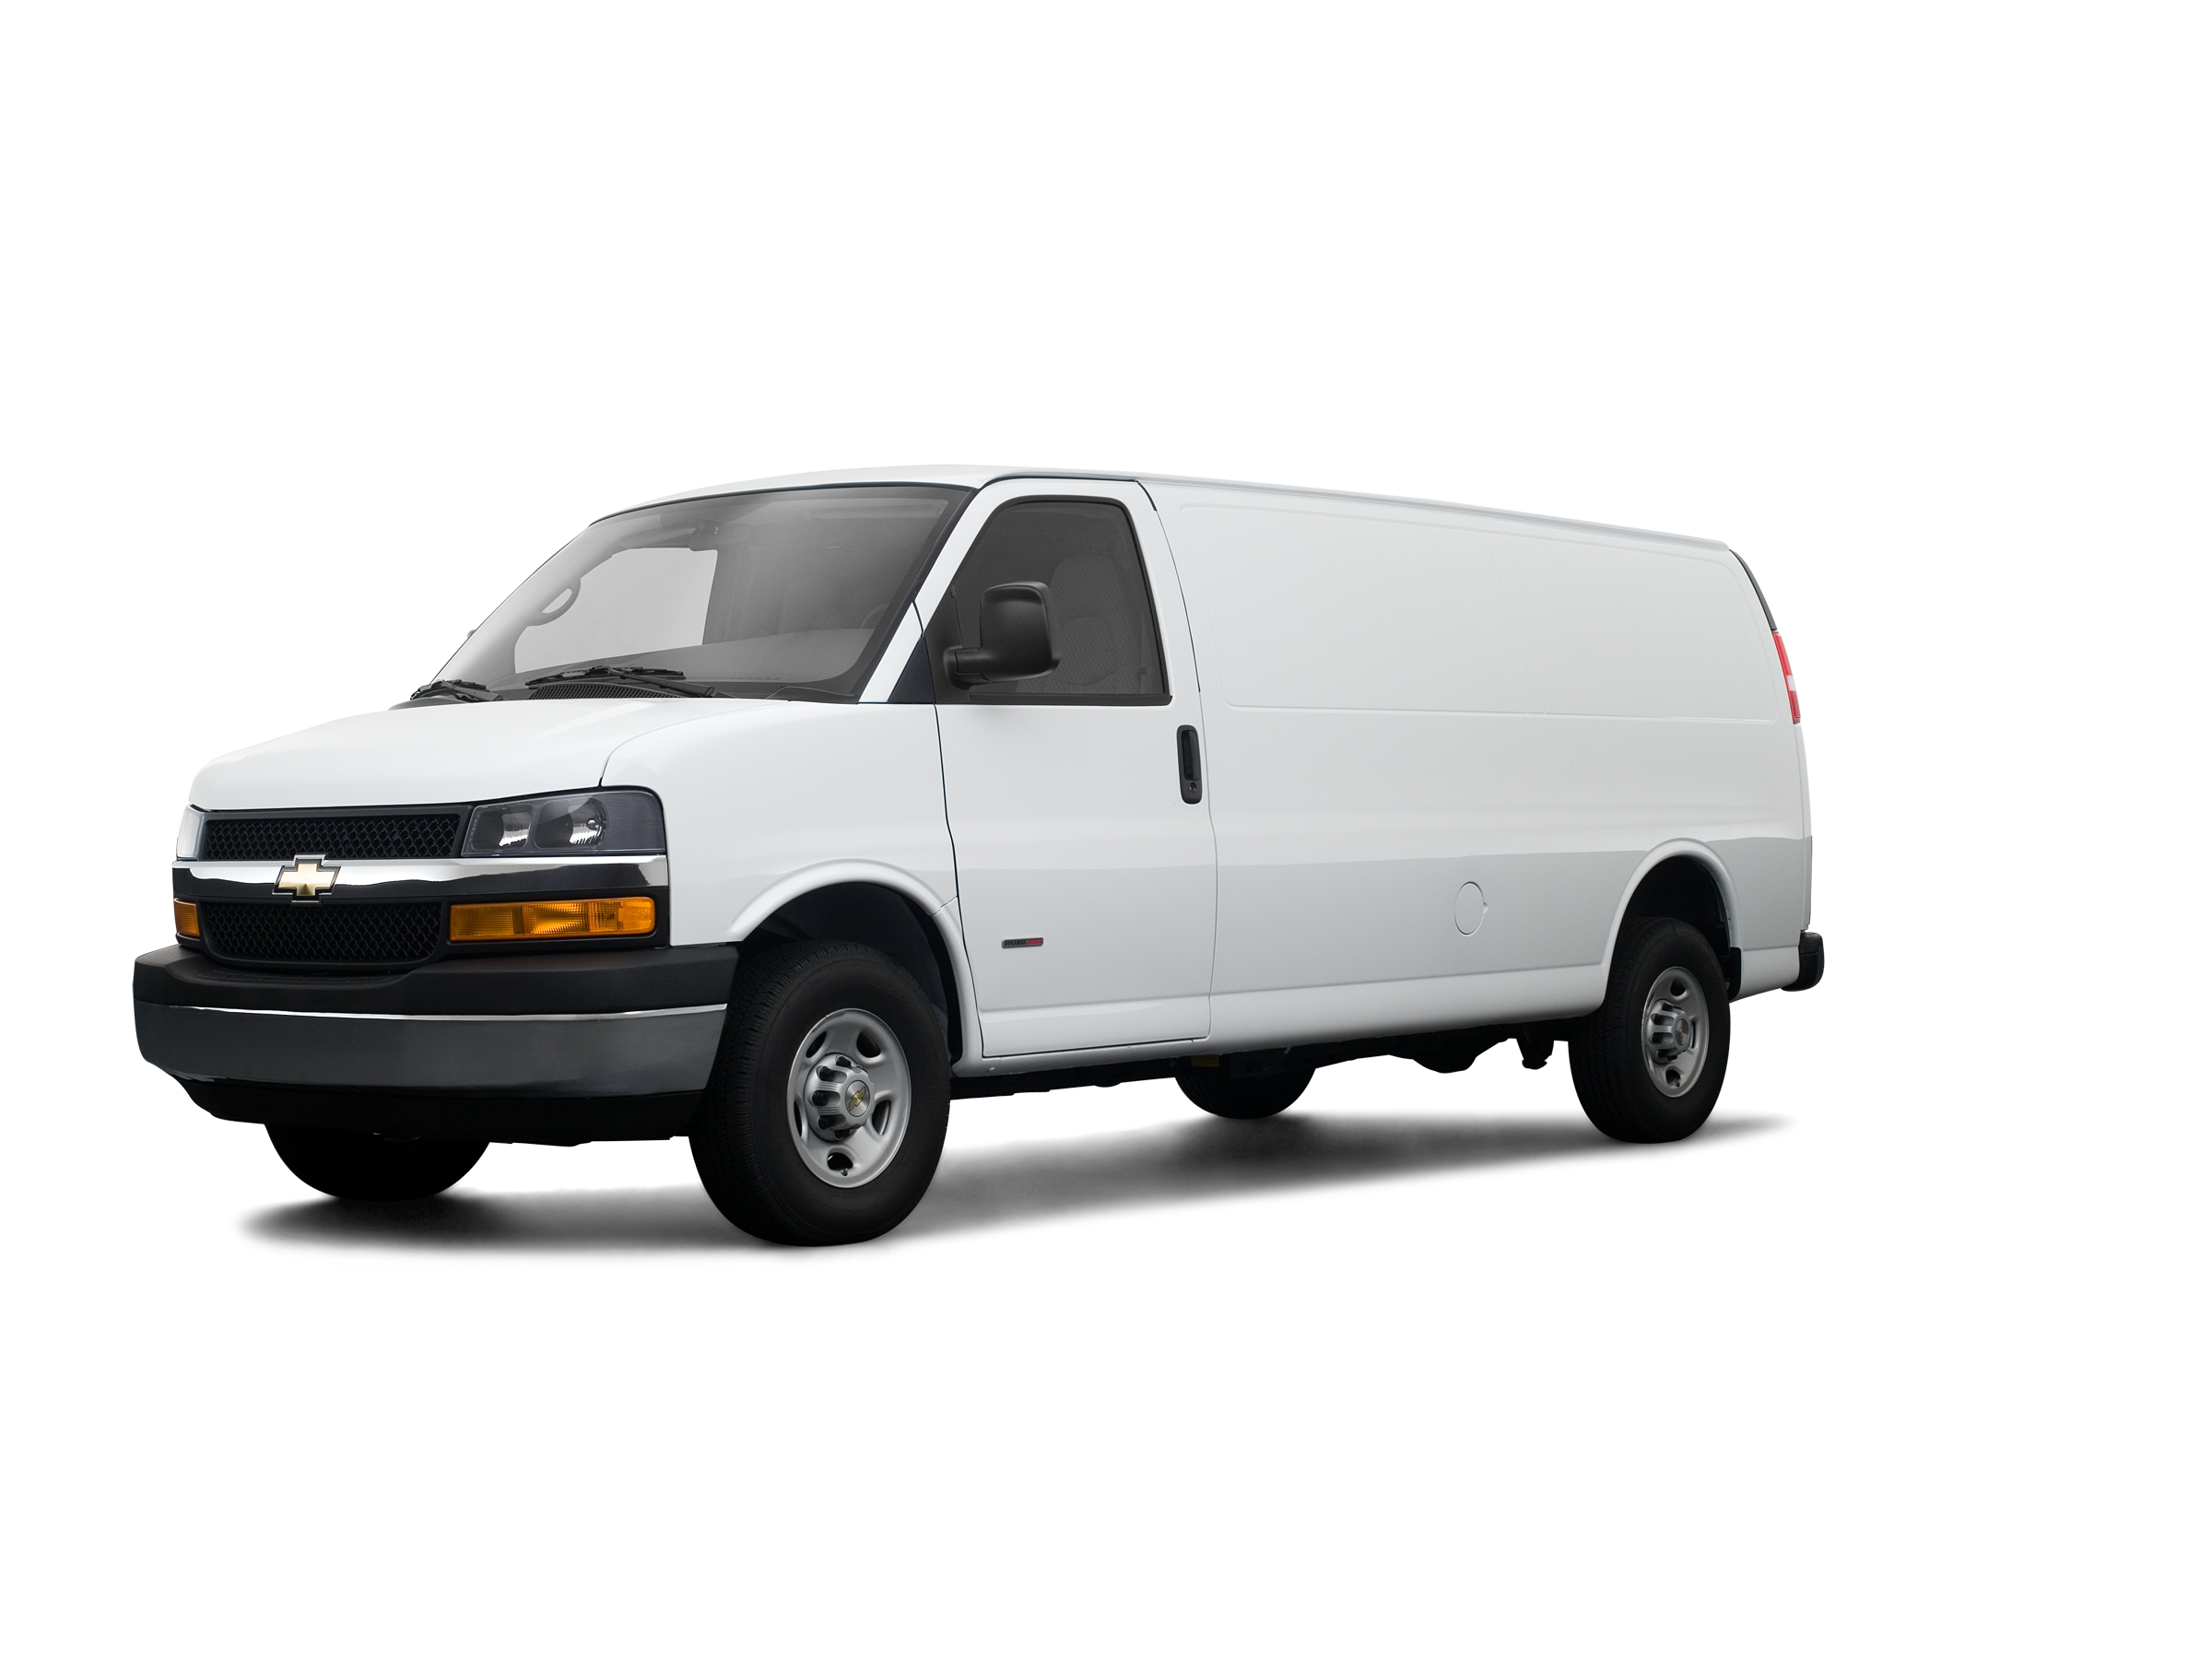 2008 Chevrolet Express 2500 Cargo Values Cars For Sale Kelley Blue Book